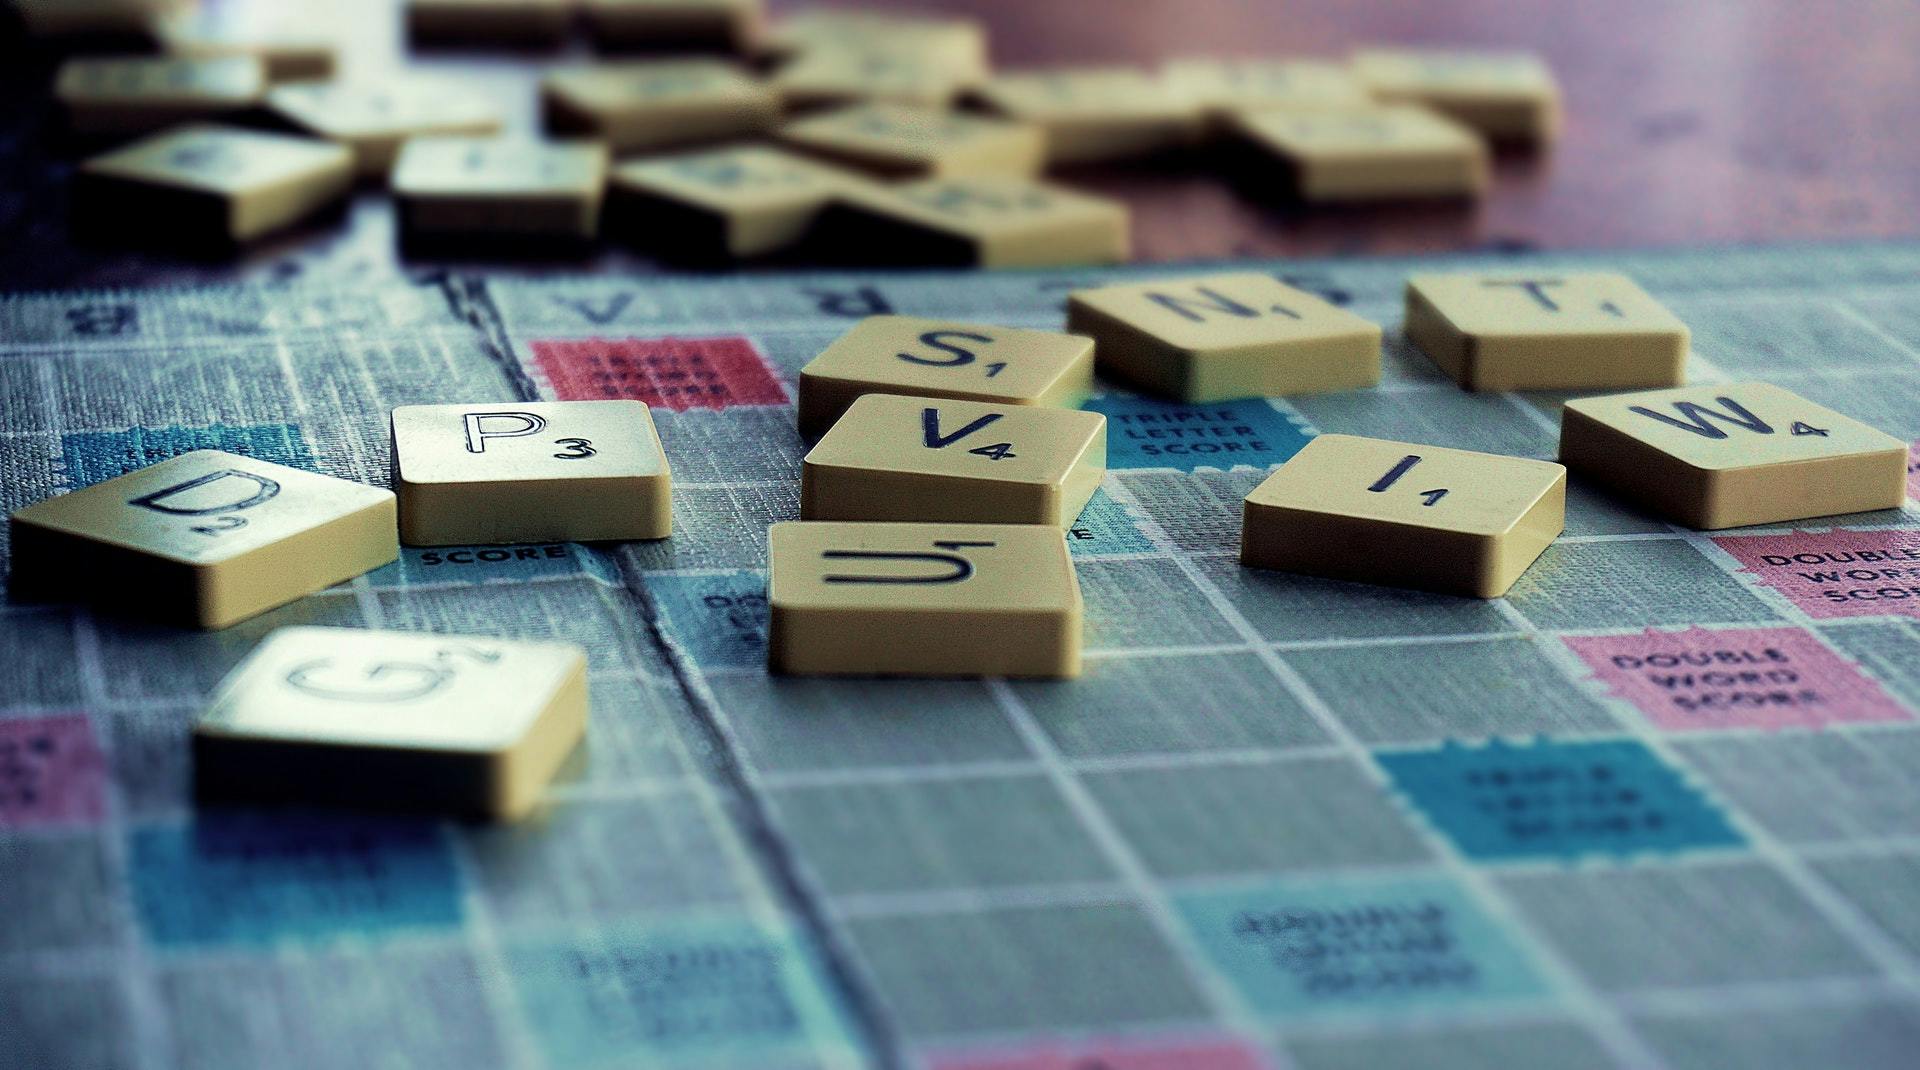 Picture of scrabble board with tiles on it.